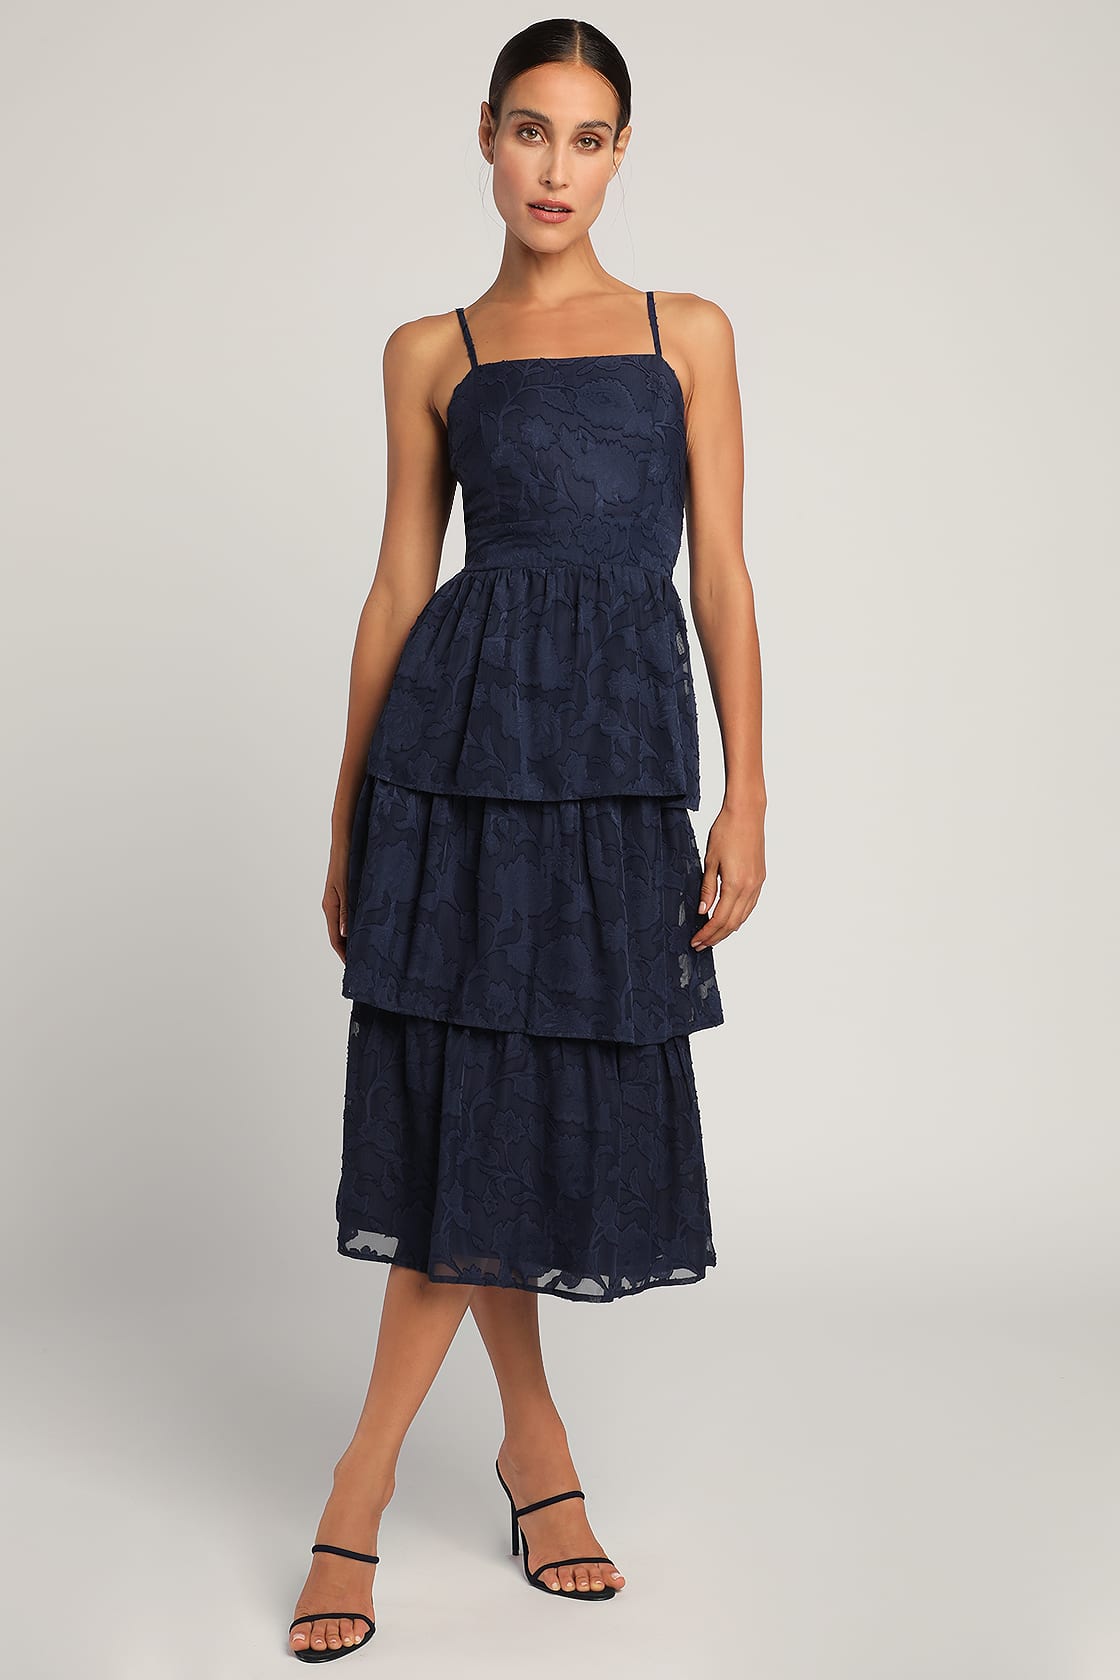 Grace and Beauty Navy Blue Burnout Floral Print Tiered Dress